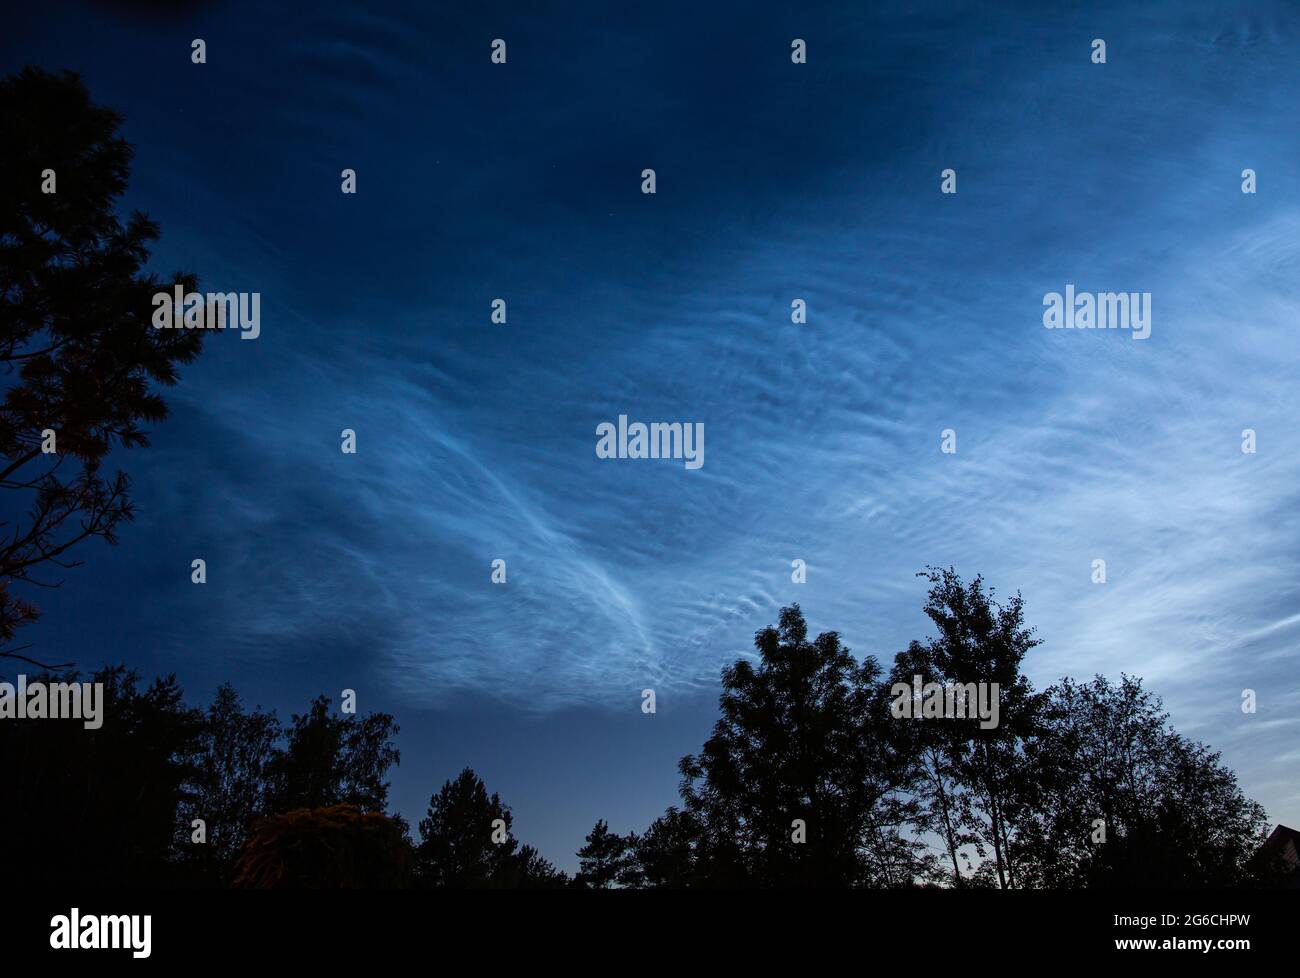 Noctilucent clouds or night shining clouds in midnight summer sky. Glowing white clouds in upper atmosphere where sun still shines on them. Stock Photo